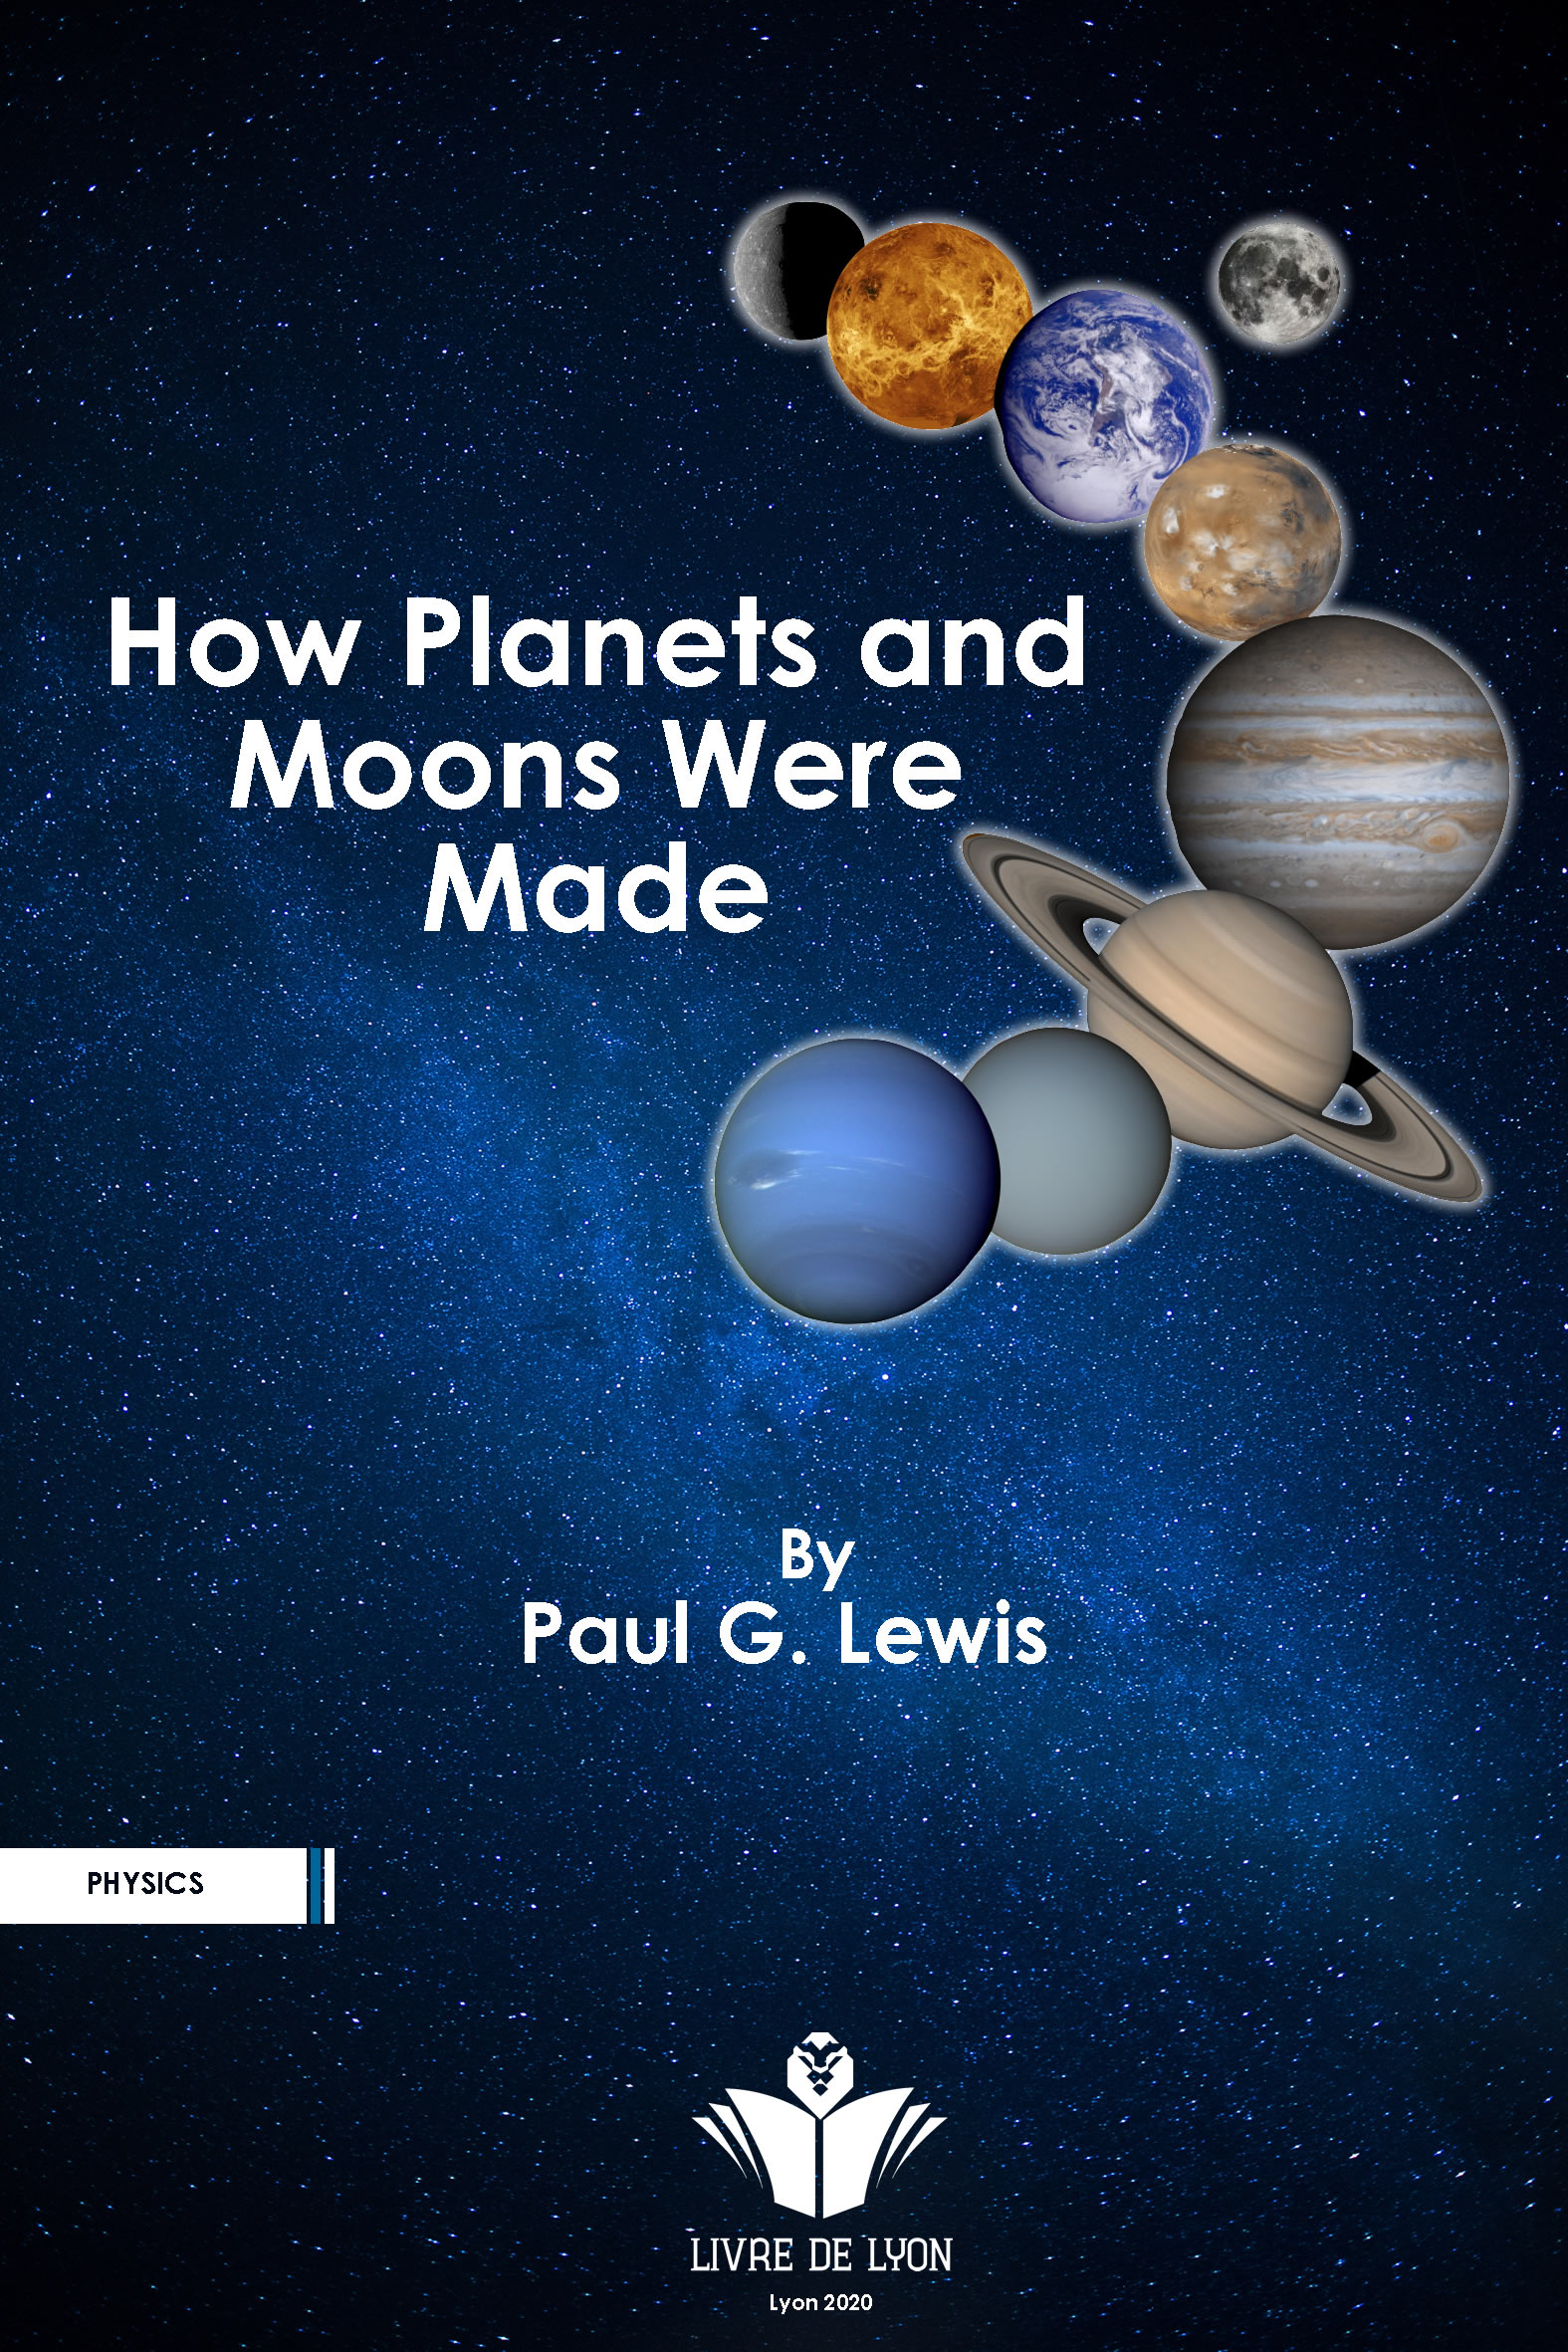 How Planets and Moons Were Made